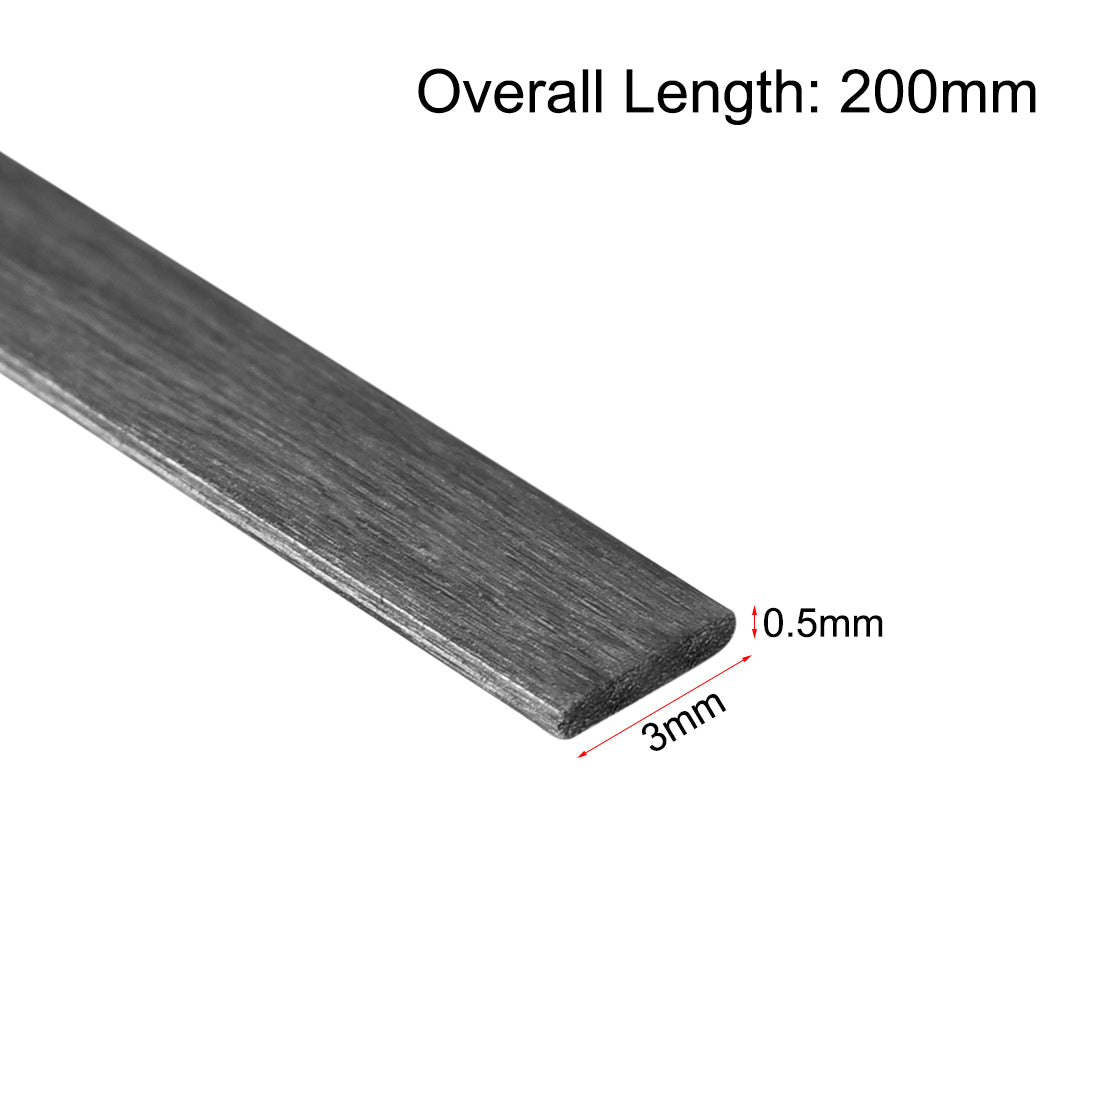 uxcell Uxcell Carbon Fiber Strip Bars 0.5x3mm 200mm Length Pultruded Carbon Fiber Strips for Kites, RC Airplane 5 Pcs